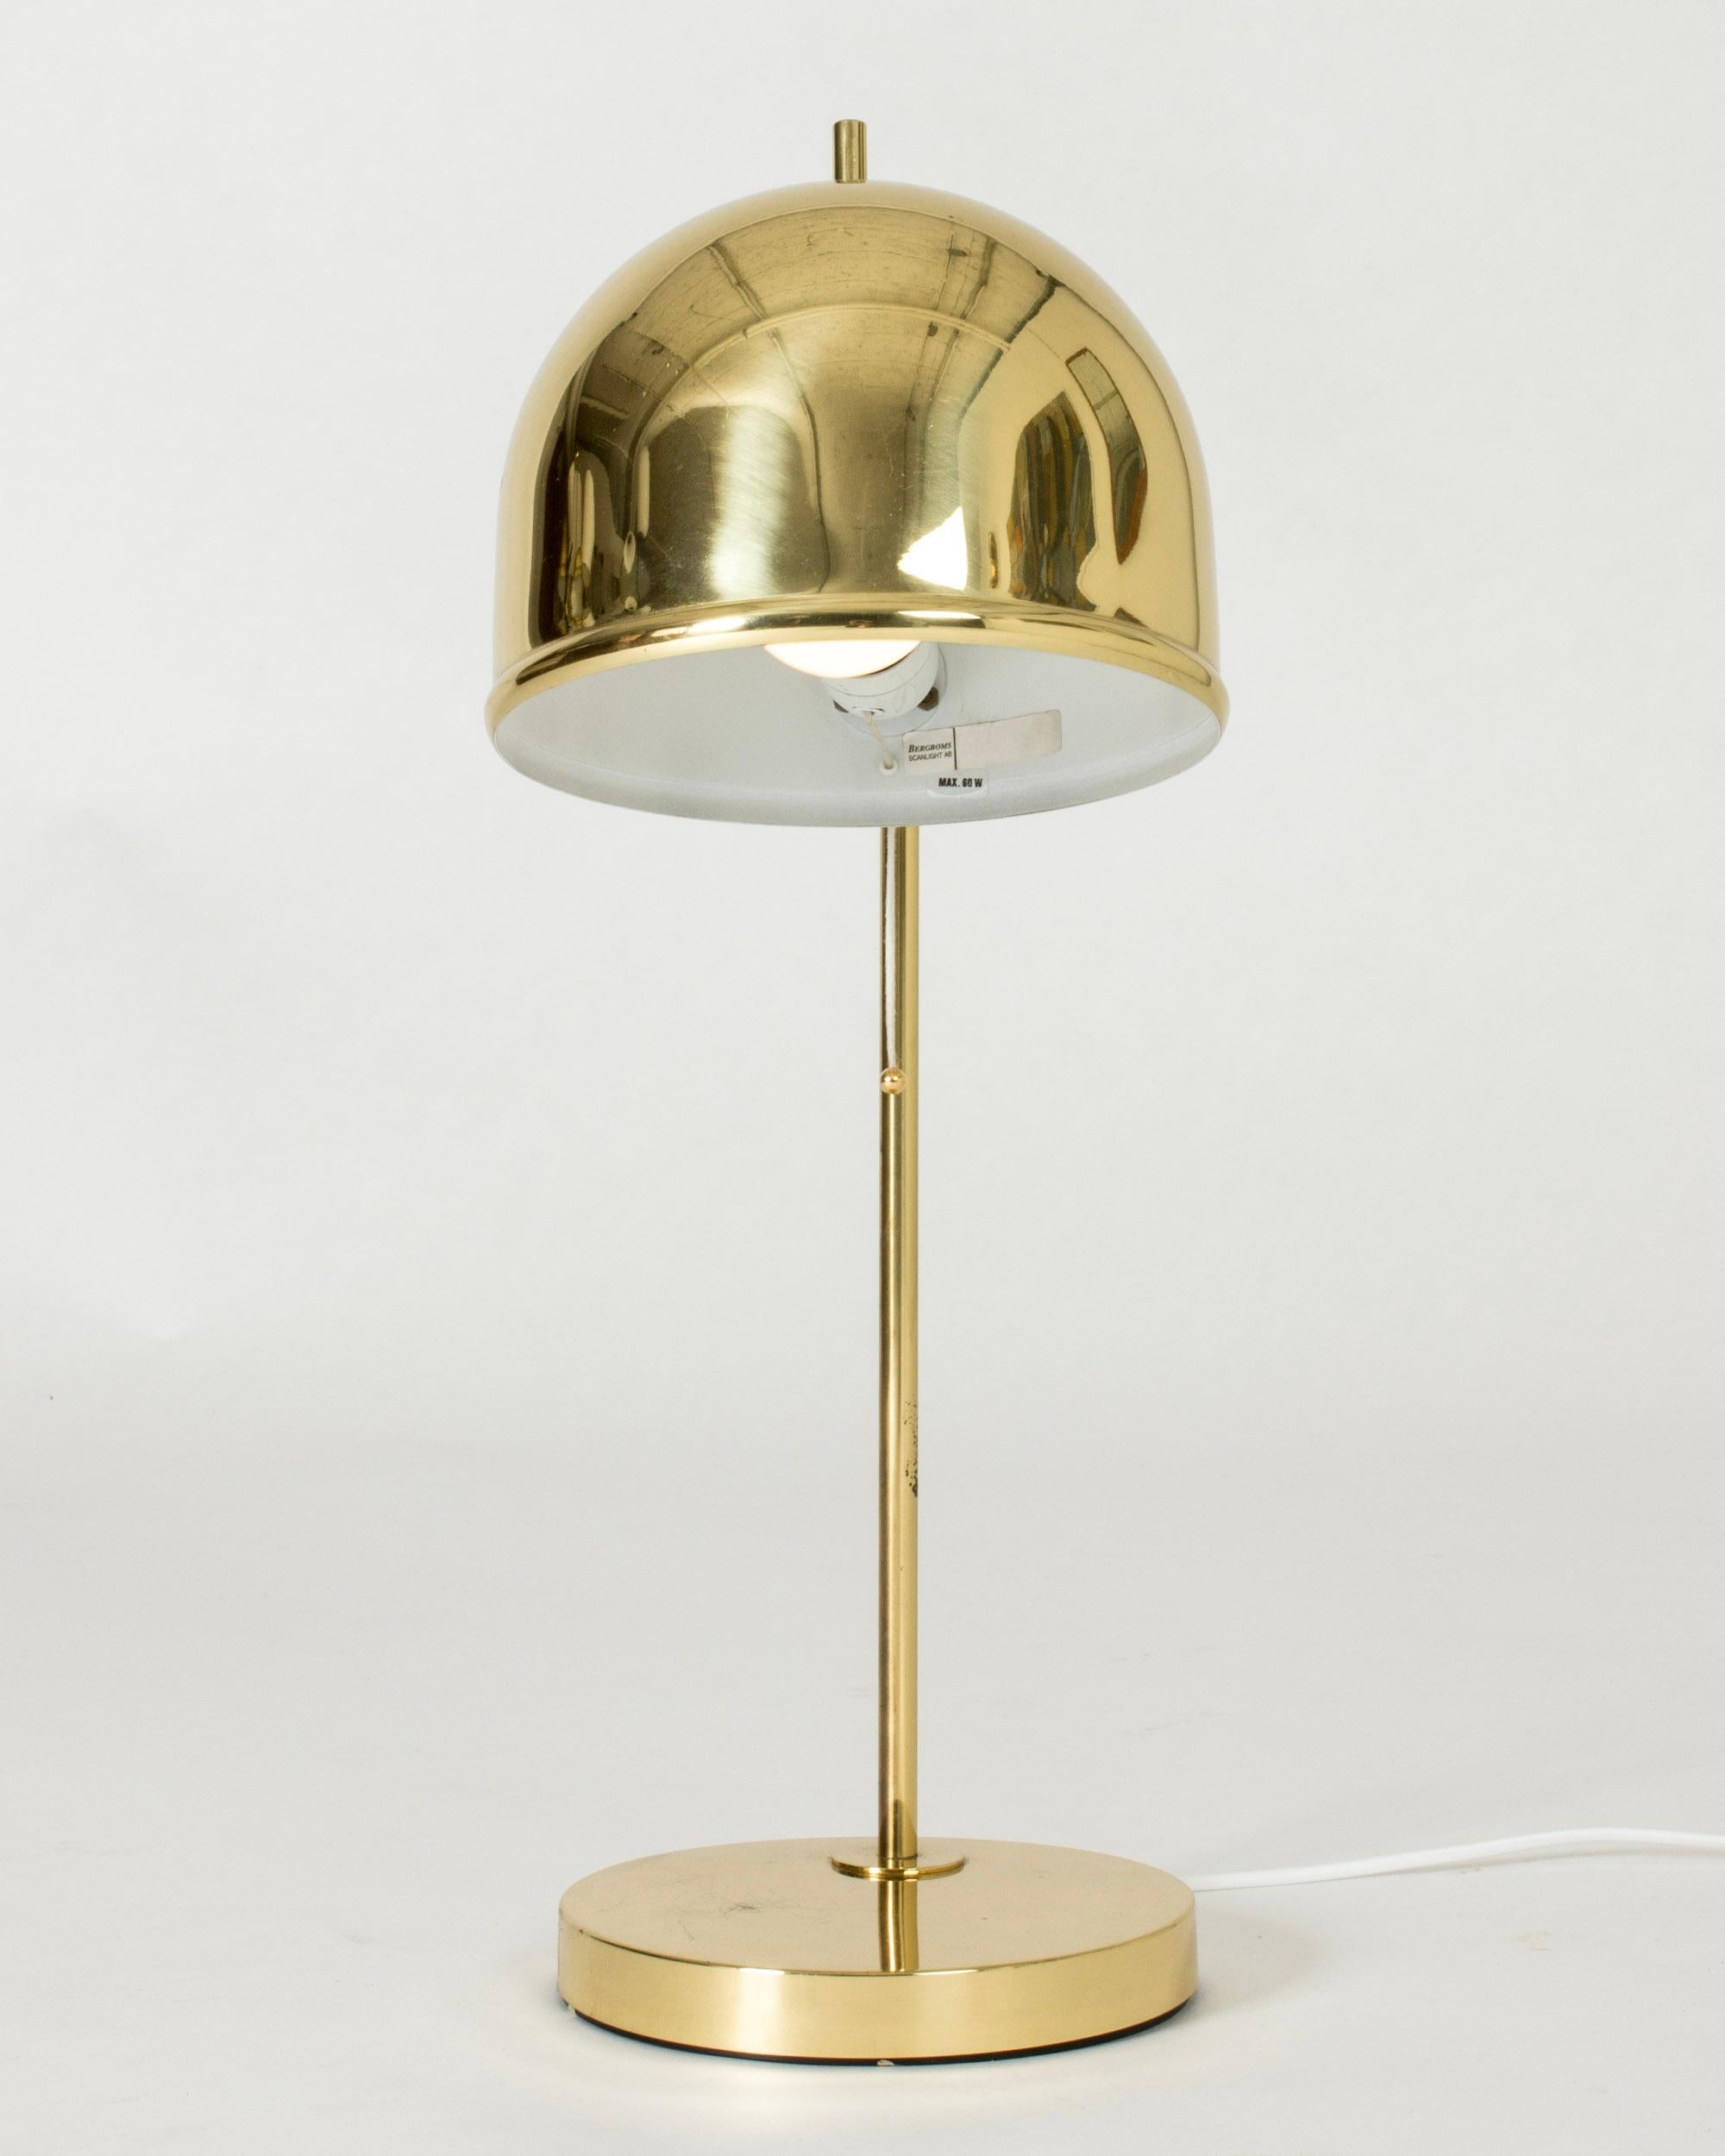 Brass table lamp from Bergboms with a dome shaped shade and strict lines. The little tip on the top of the shade is a fun detail.